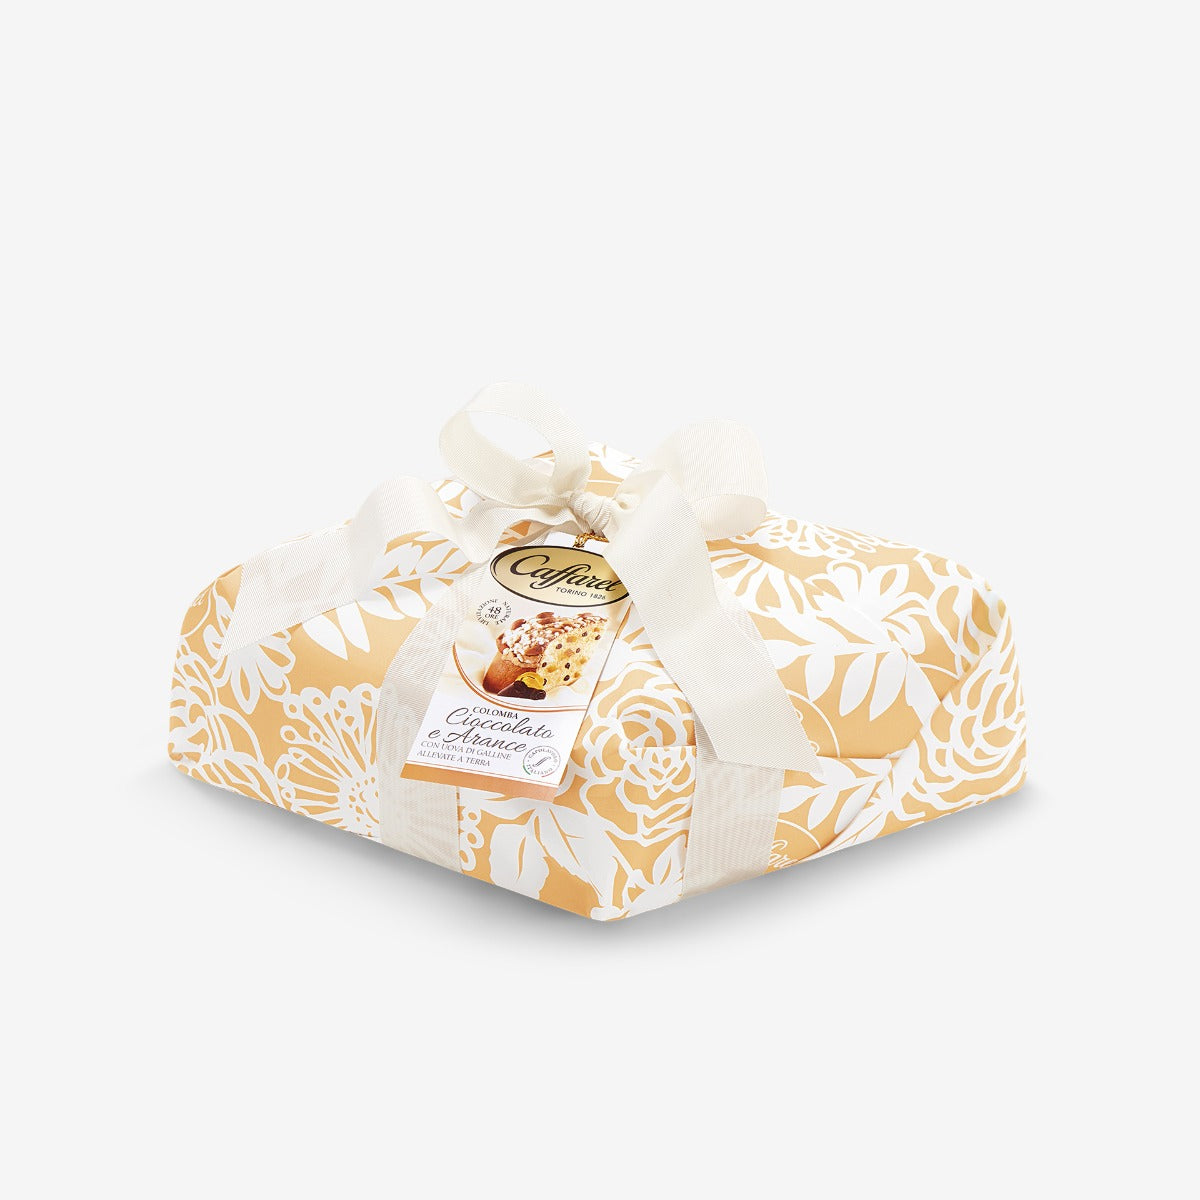 Colomba with dark chocolate and Sicilian oranges